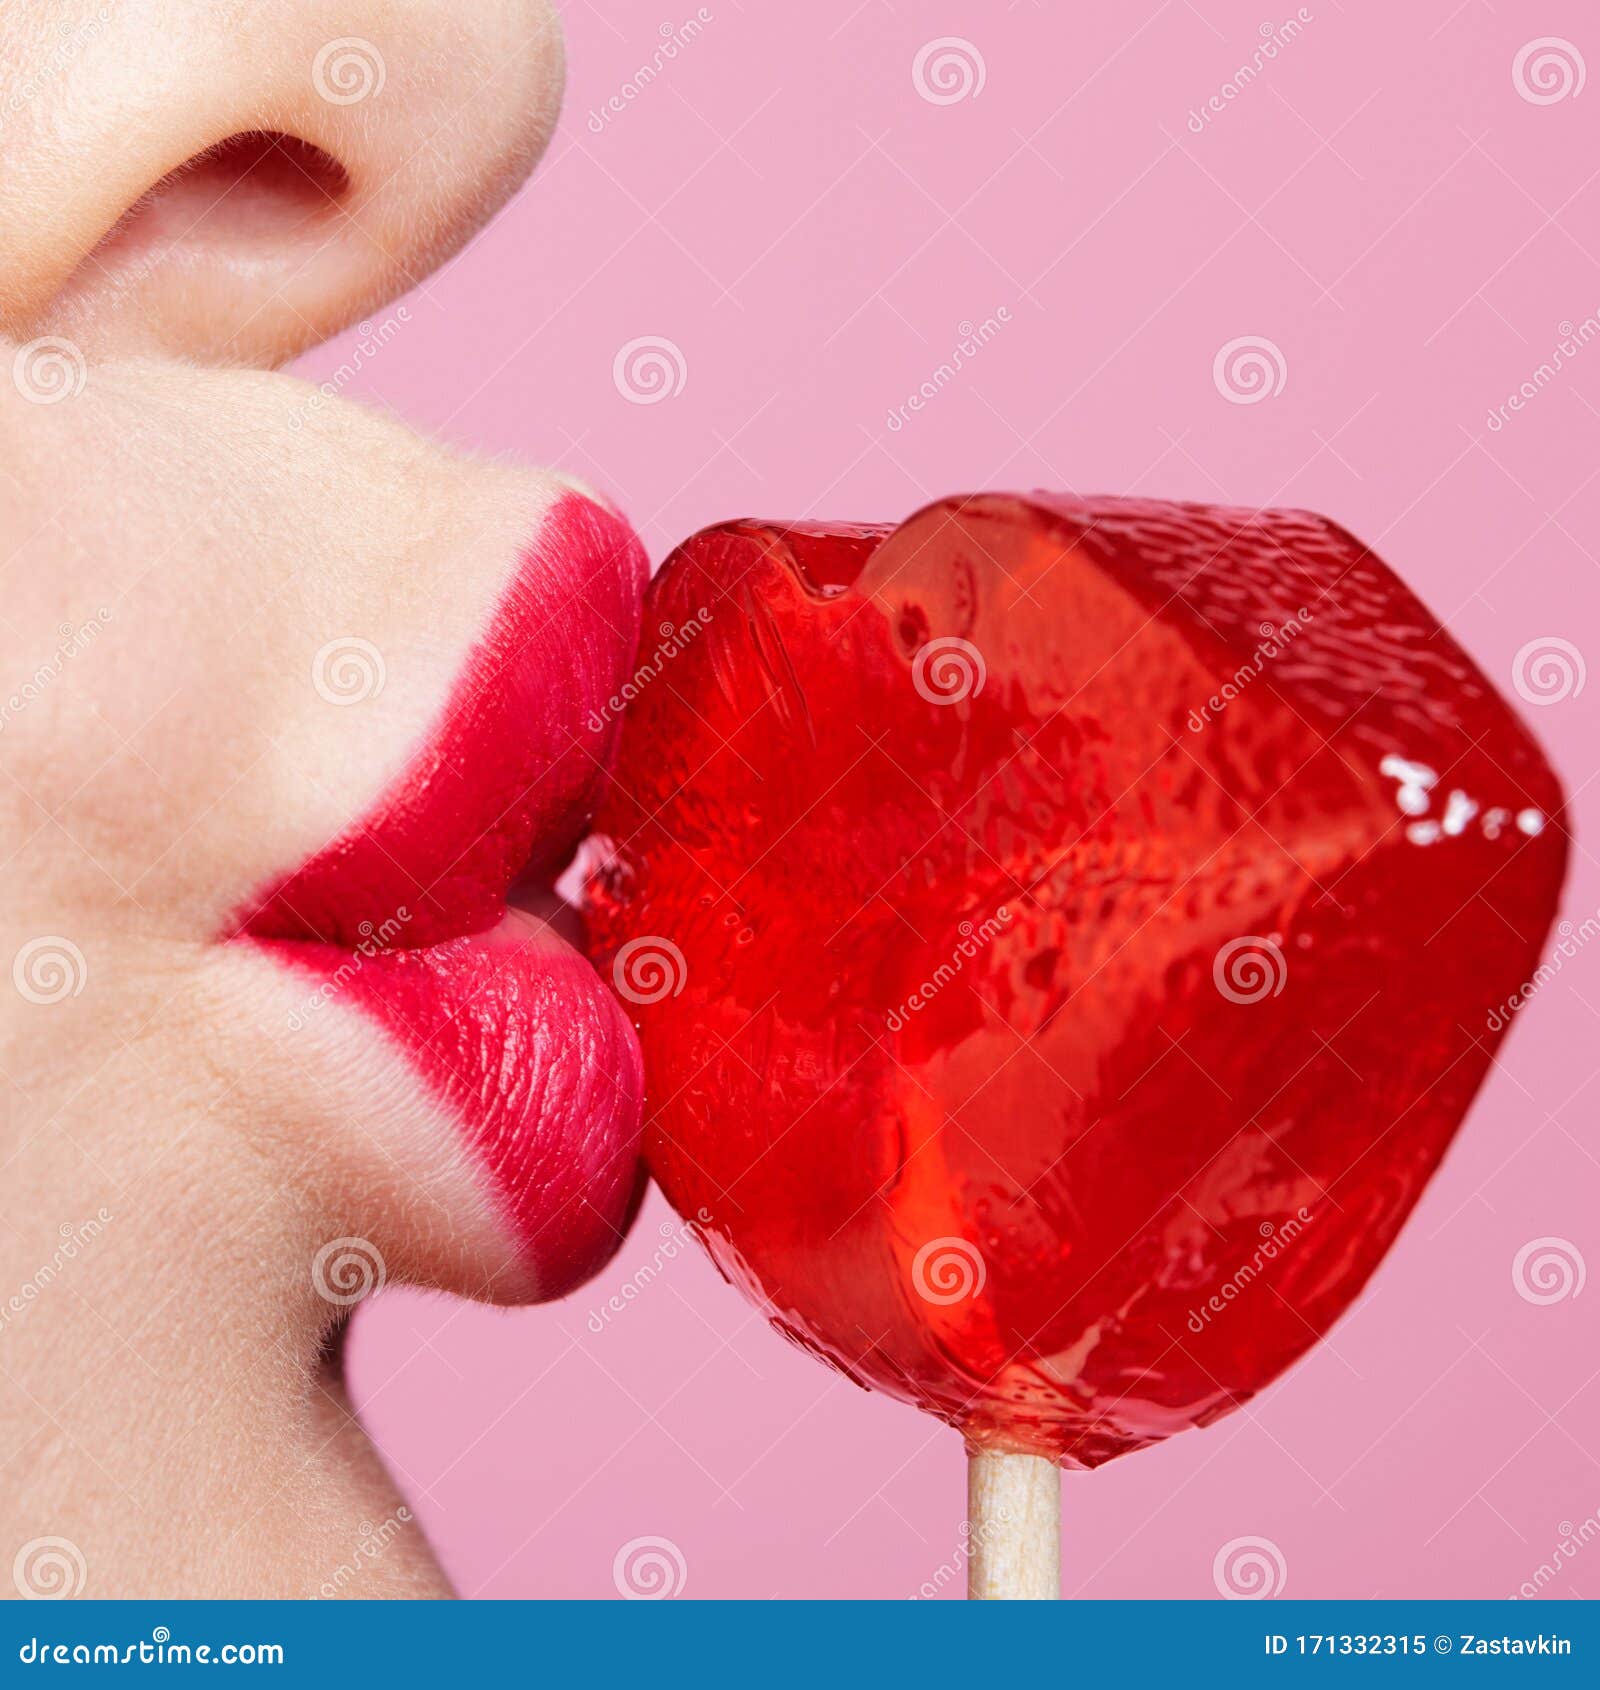 red female lips  lollipop. close-up of woman lips kissing candy. sweet tooth concept